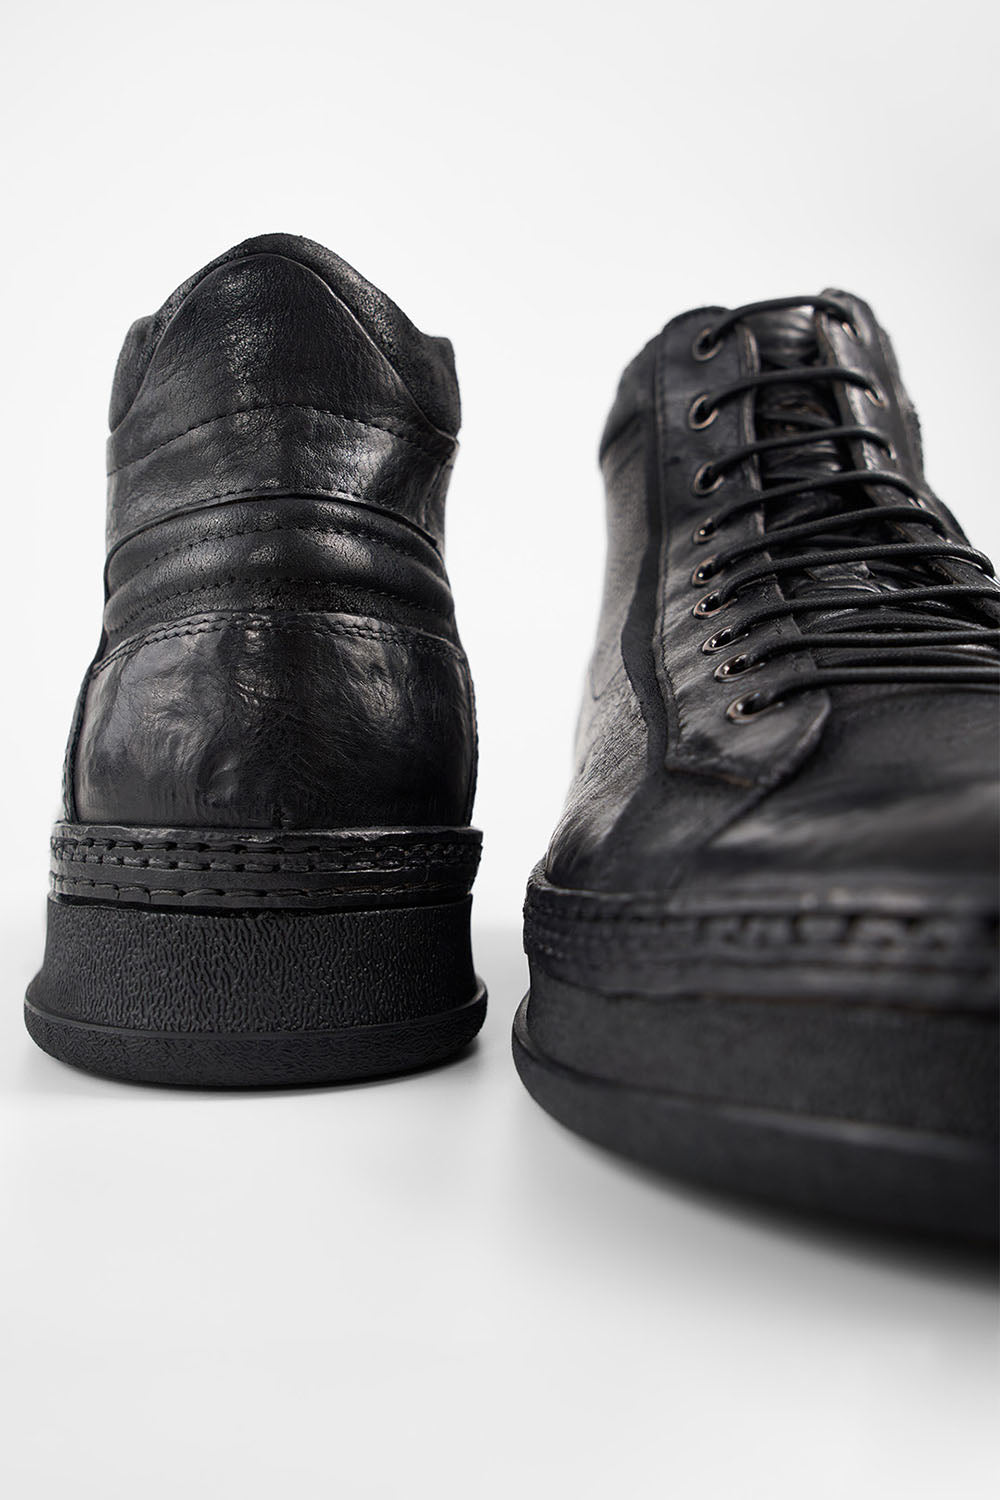 COLE urban-black welted distressed high sneakers.